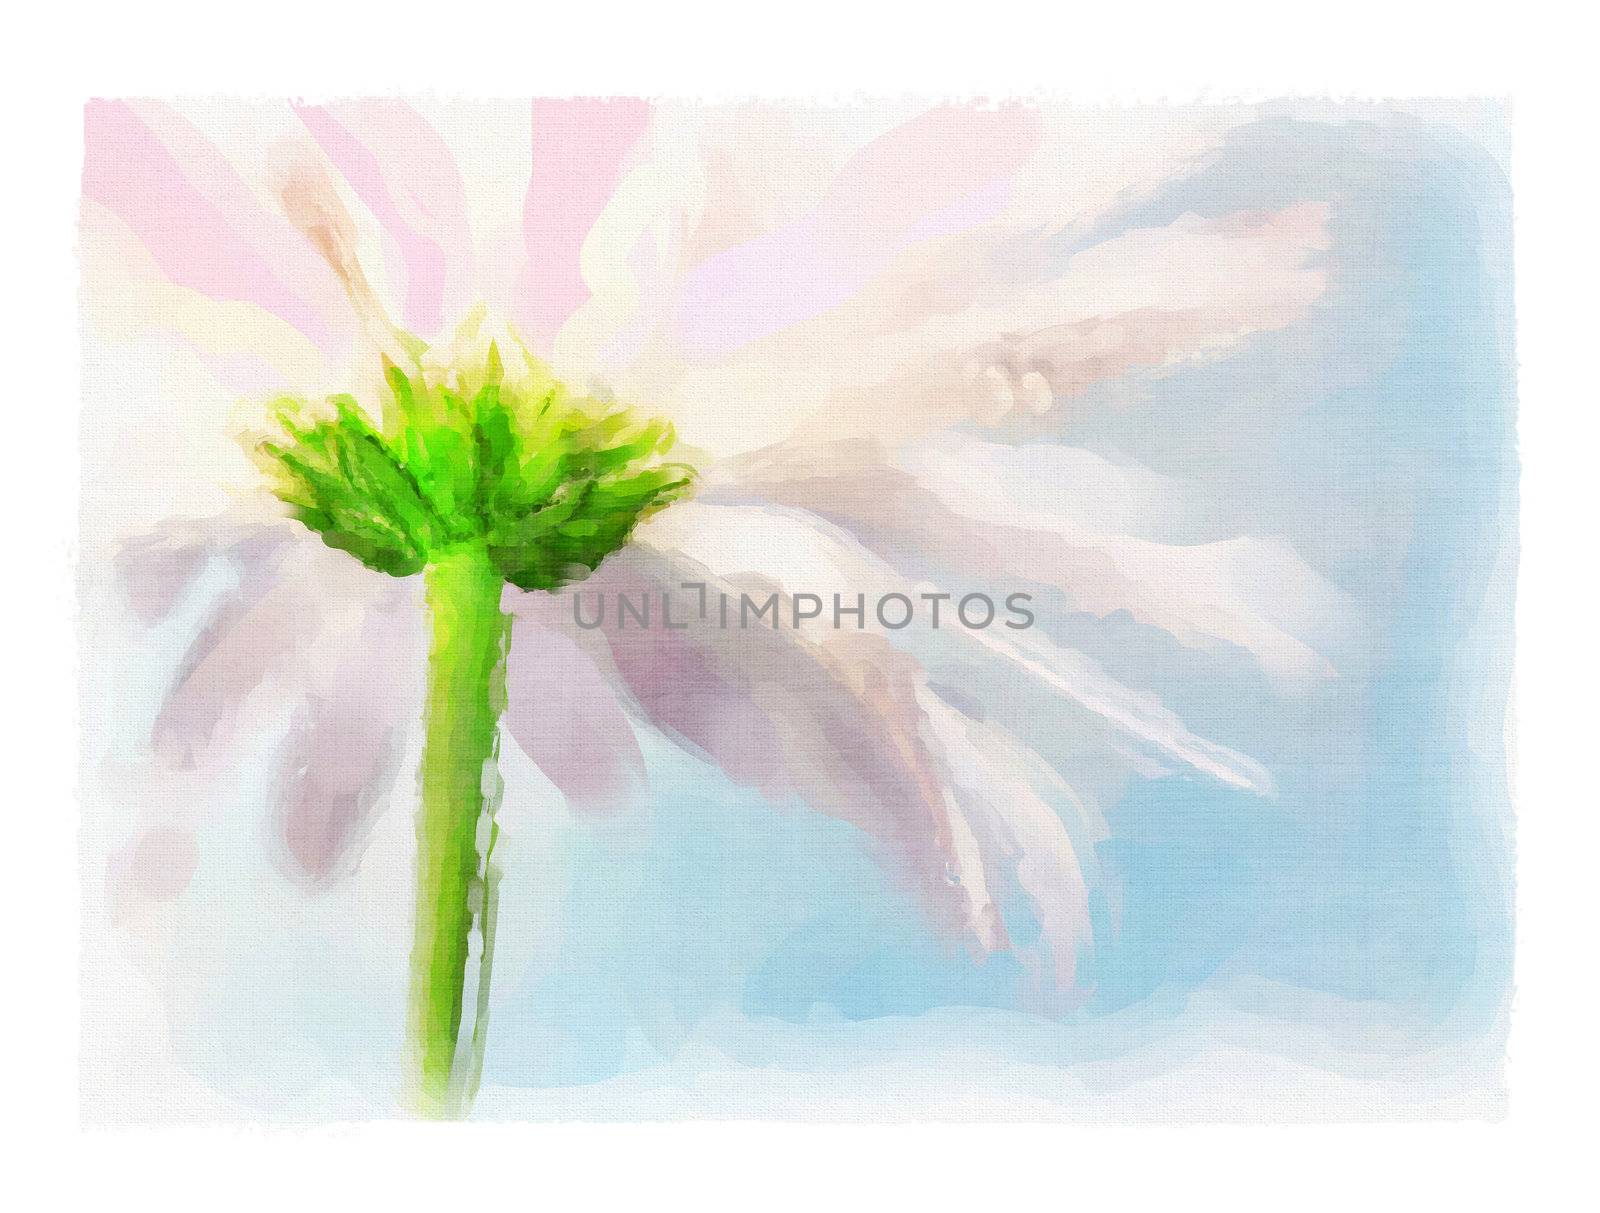 Digital watercolor of pink daisy against a blue summer sky